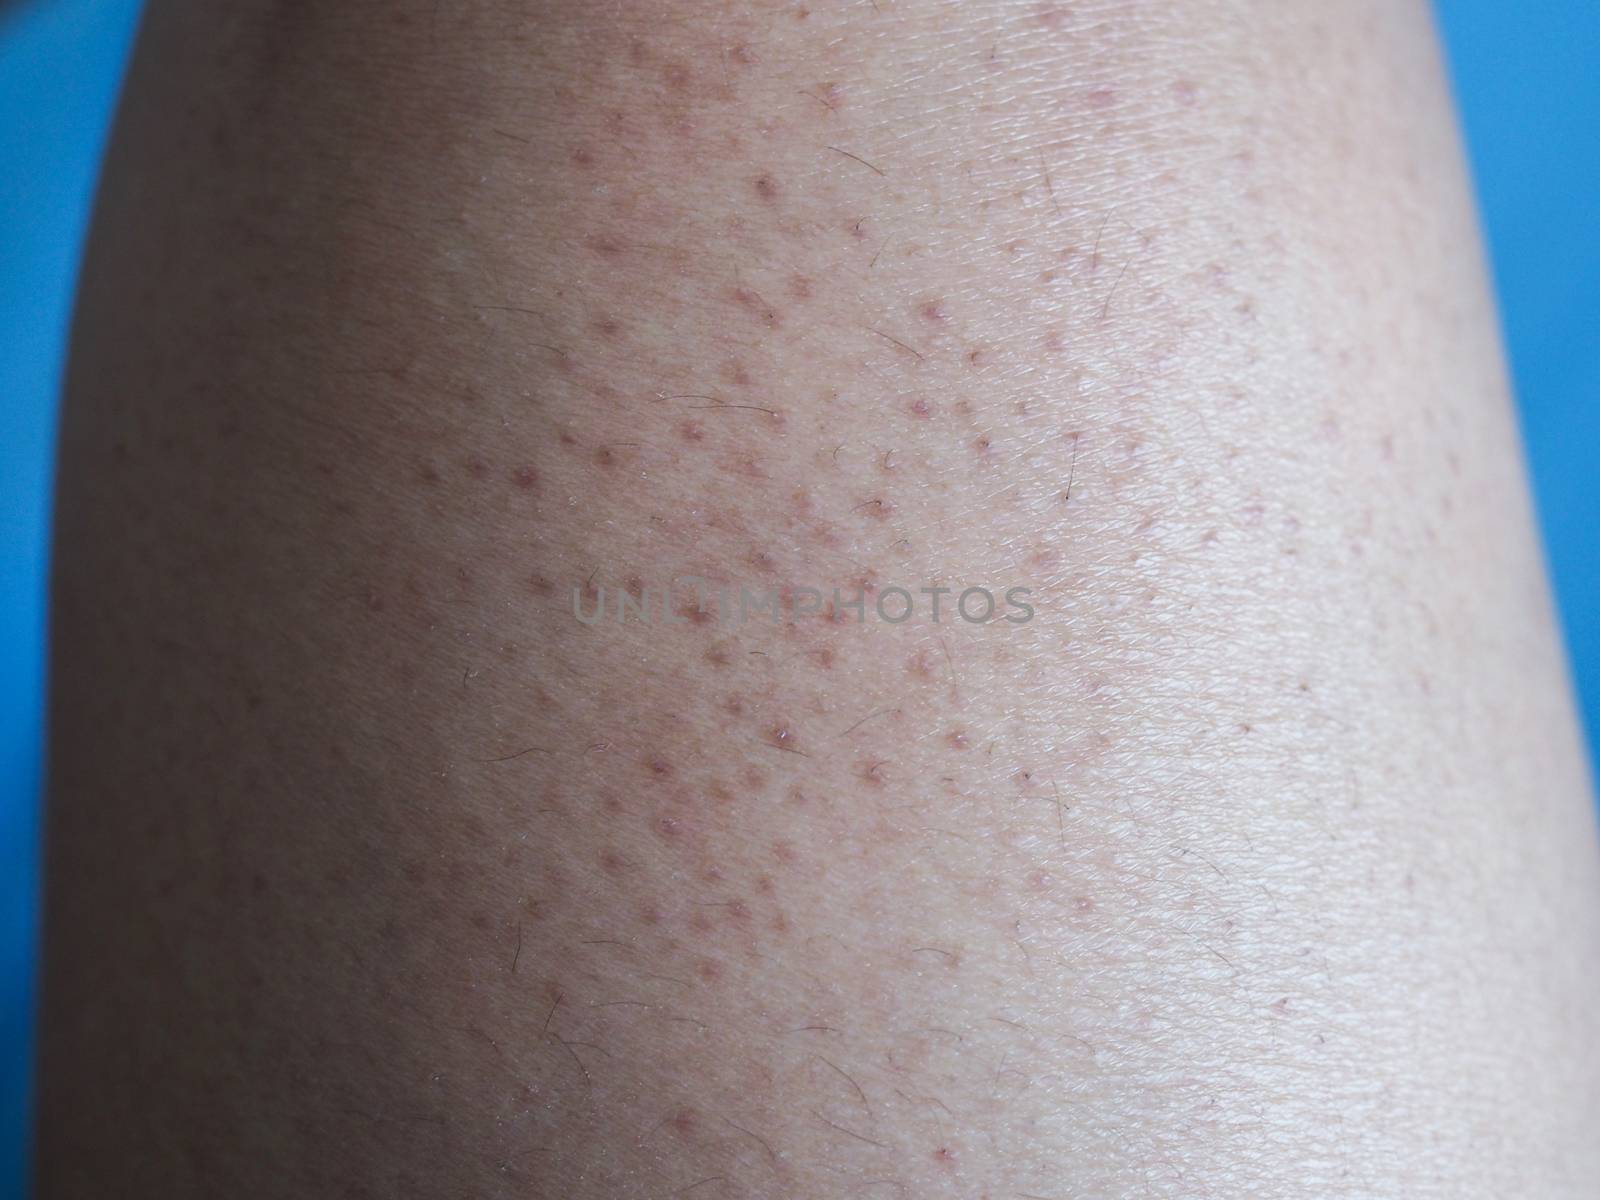 Problems of Body Skin, large pores and dark colors on legs. by kittima05